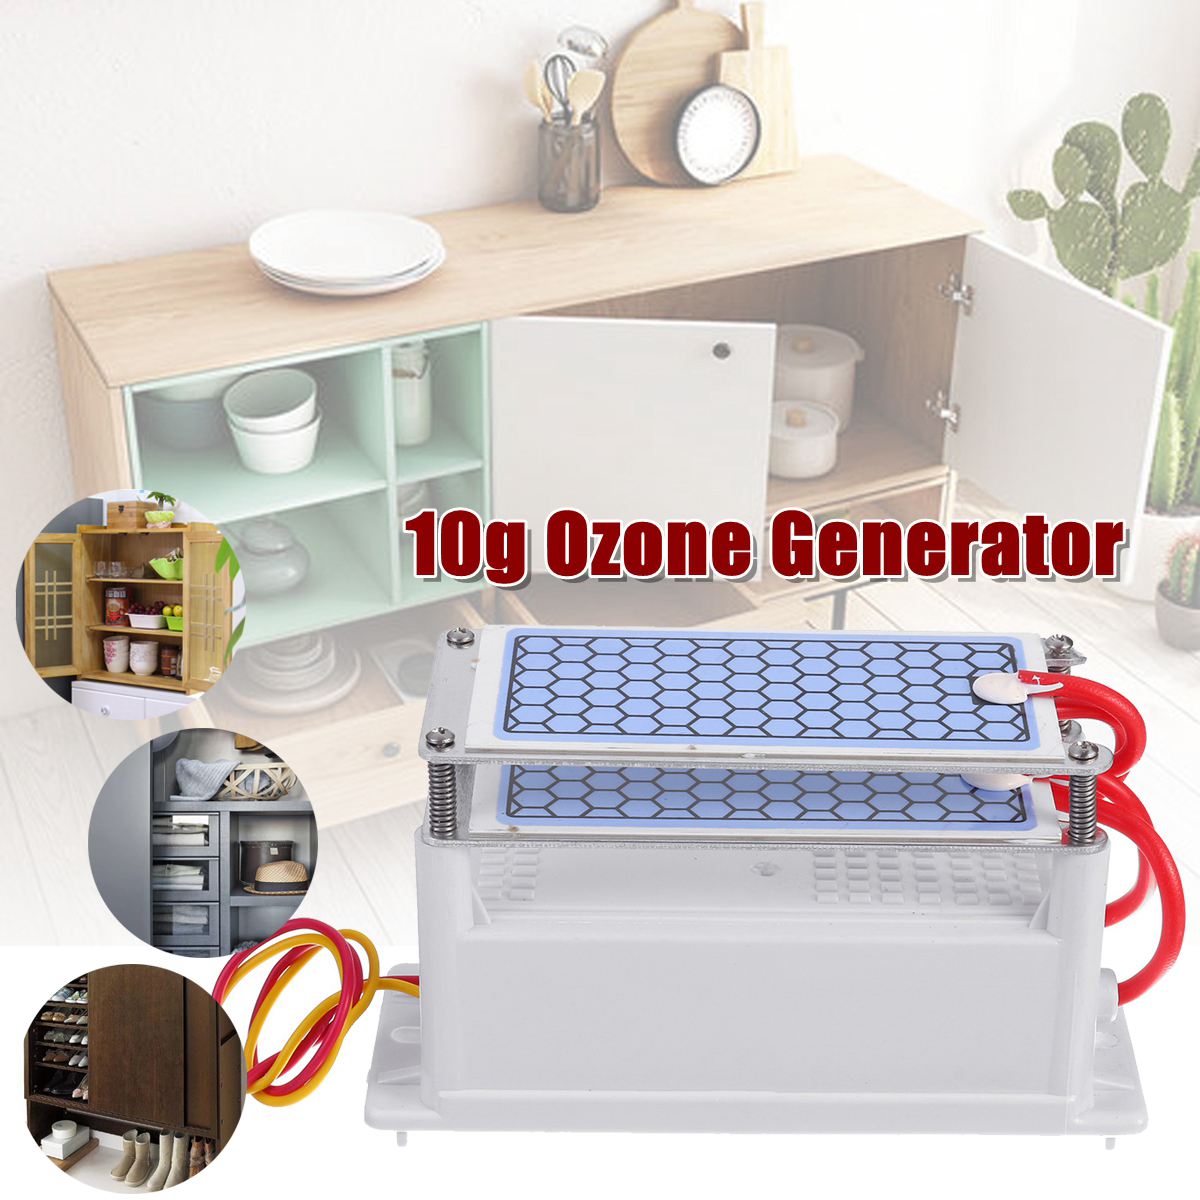 10g-Ozone-Generator-Ozone-Disinfection-Machine-Home--Commercial-Air-Purifier-Cleaner-Ozone-Generator-1716600-1